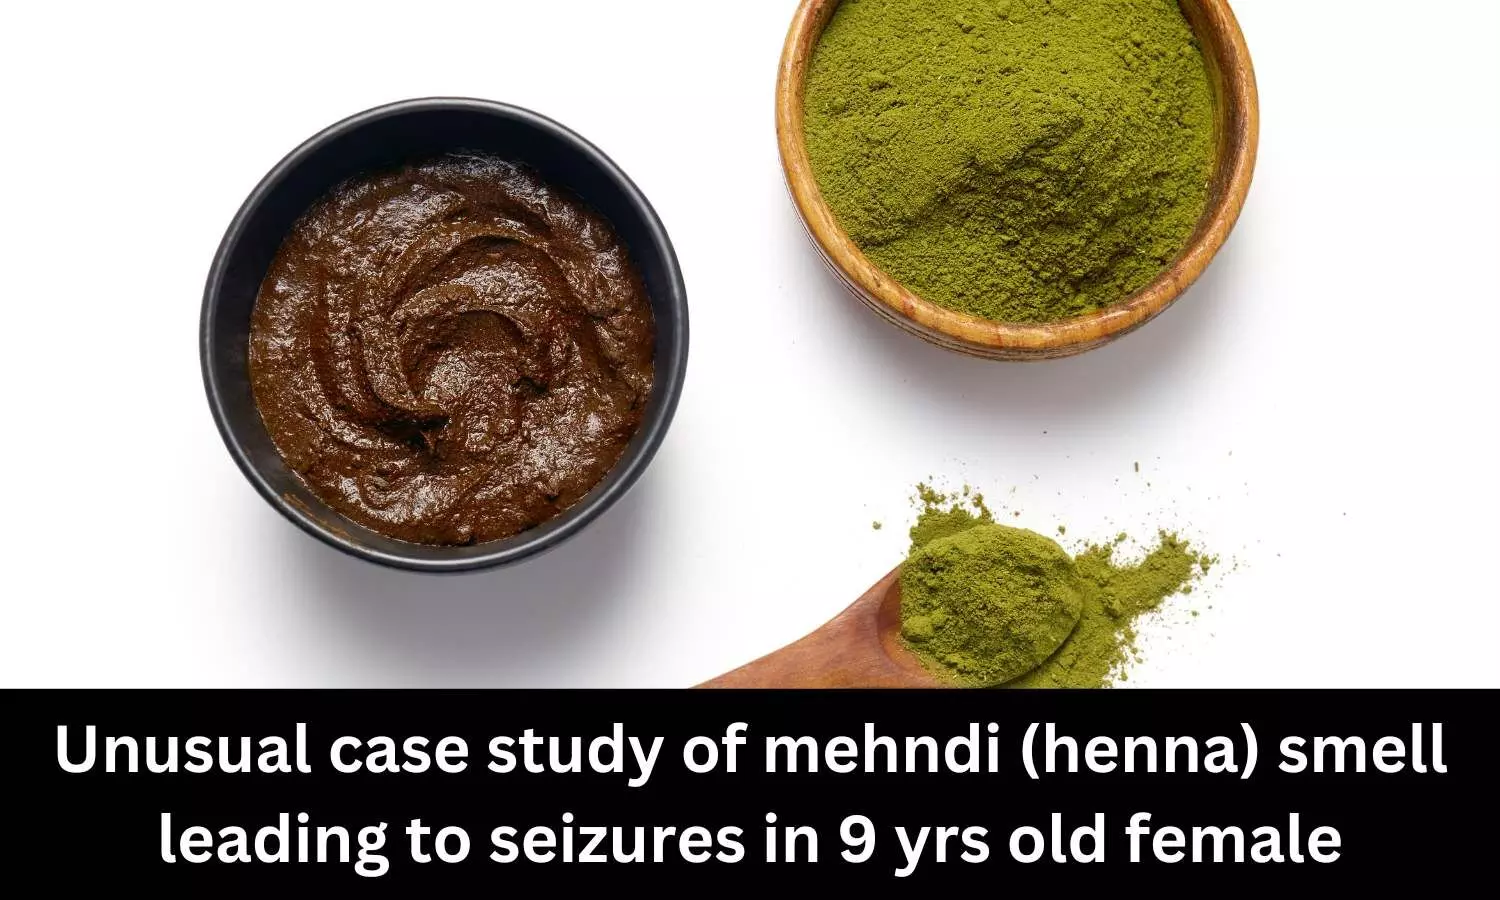 Unusual case study of mehndi smell leading to seizures in 9 yrs old female